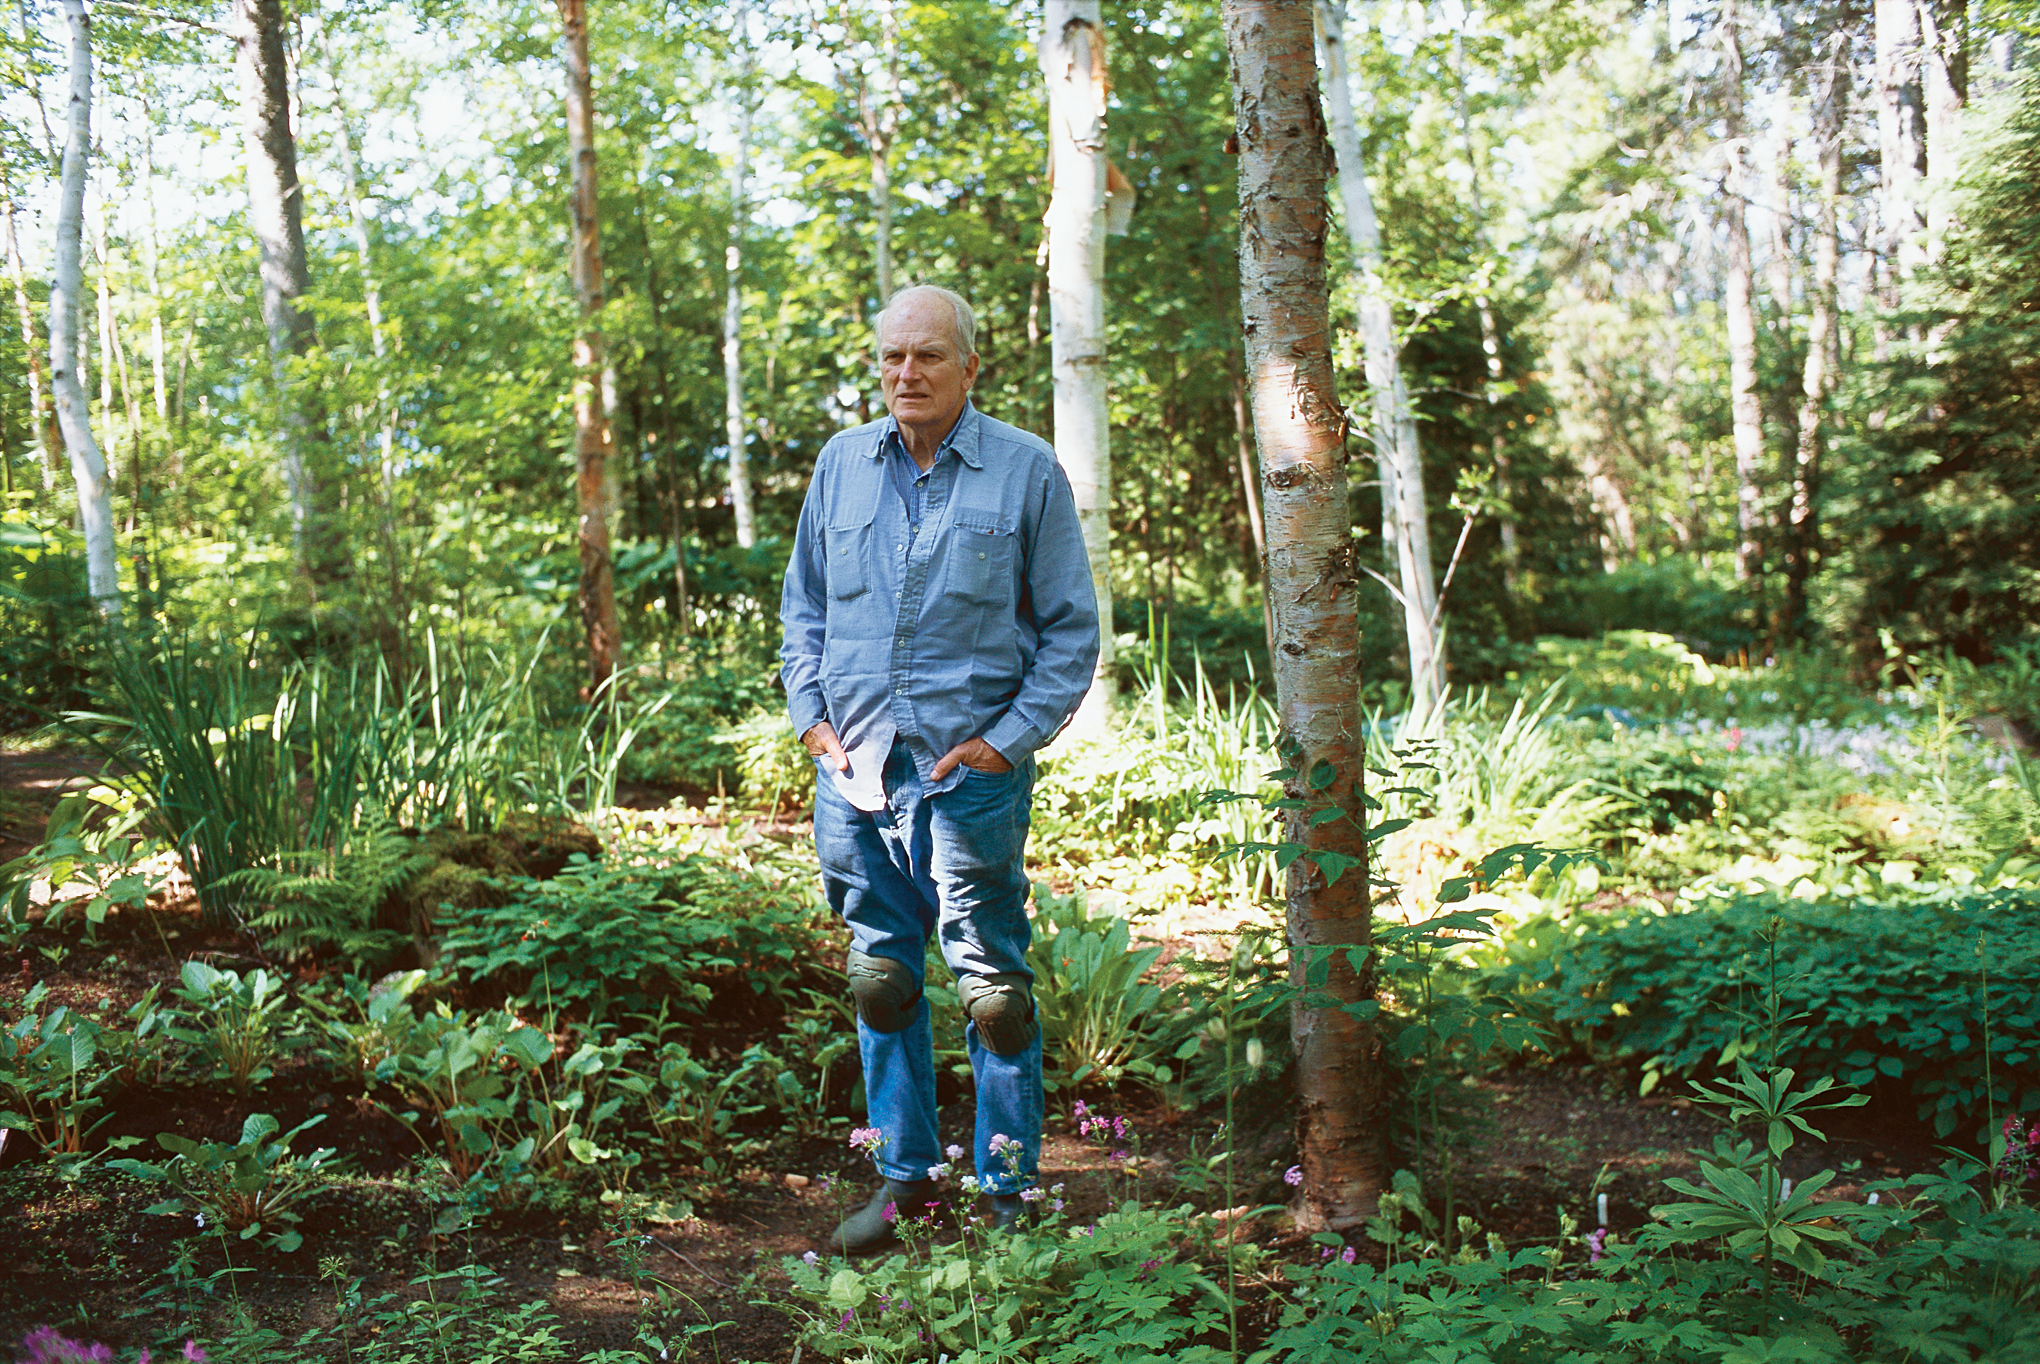 Frank Cabot, with his ever-present knee pads. Image courtesy of Garden Design Magazine.